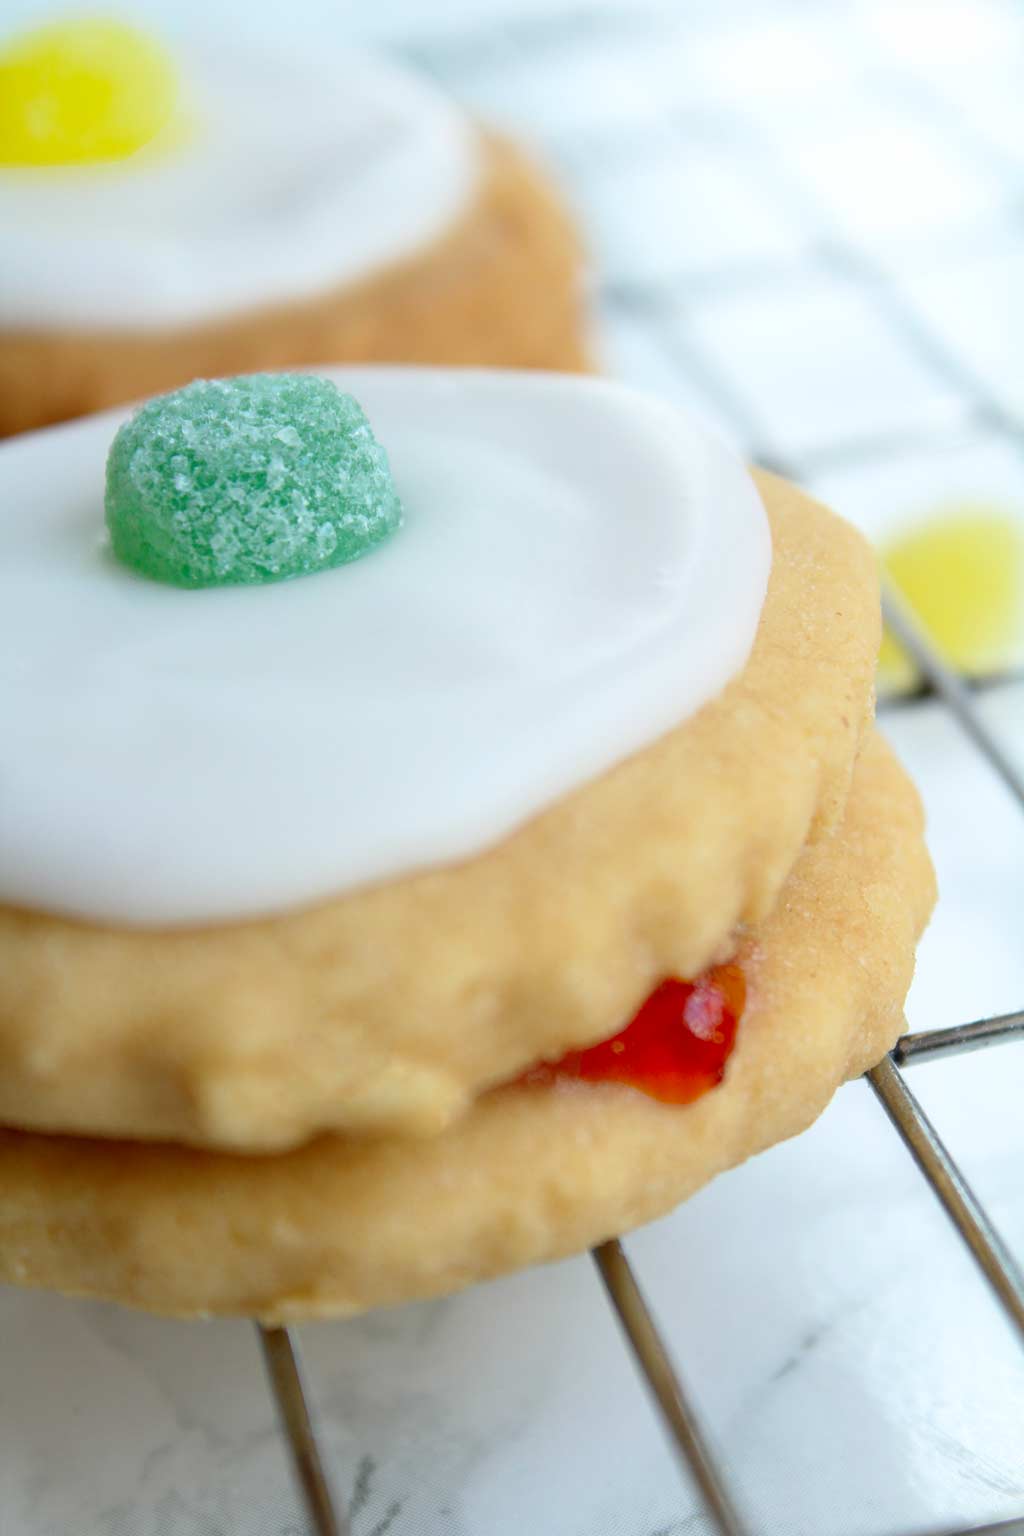 empire biscuit with green jelly tot on top